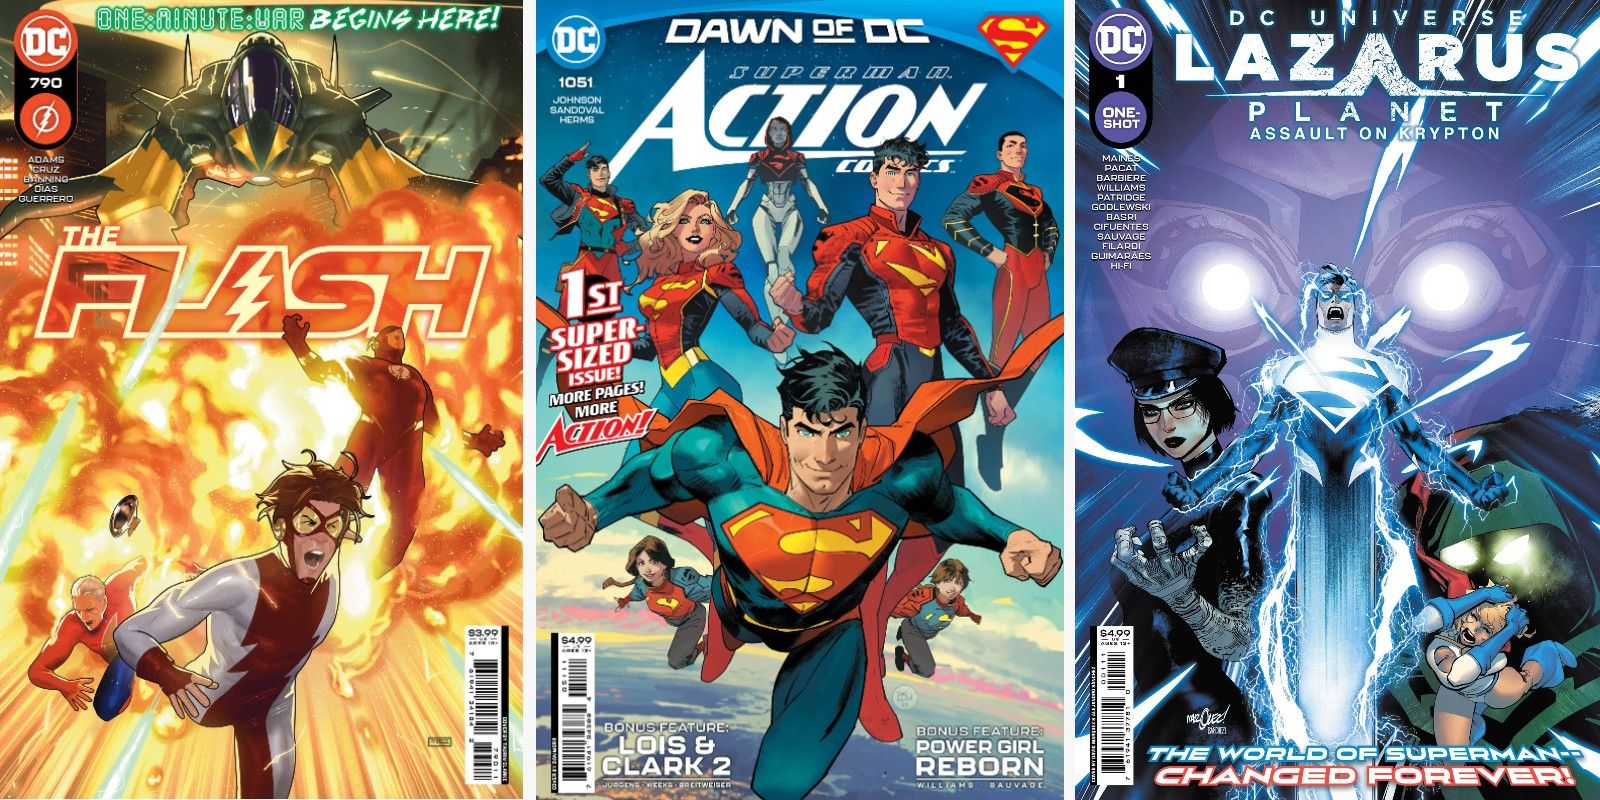 Covers for The Flash 790, Action Comics 1050, and Lazarus Planet Assault on Krypton 1